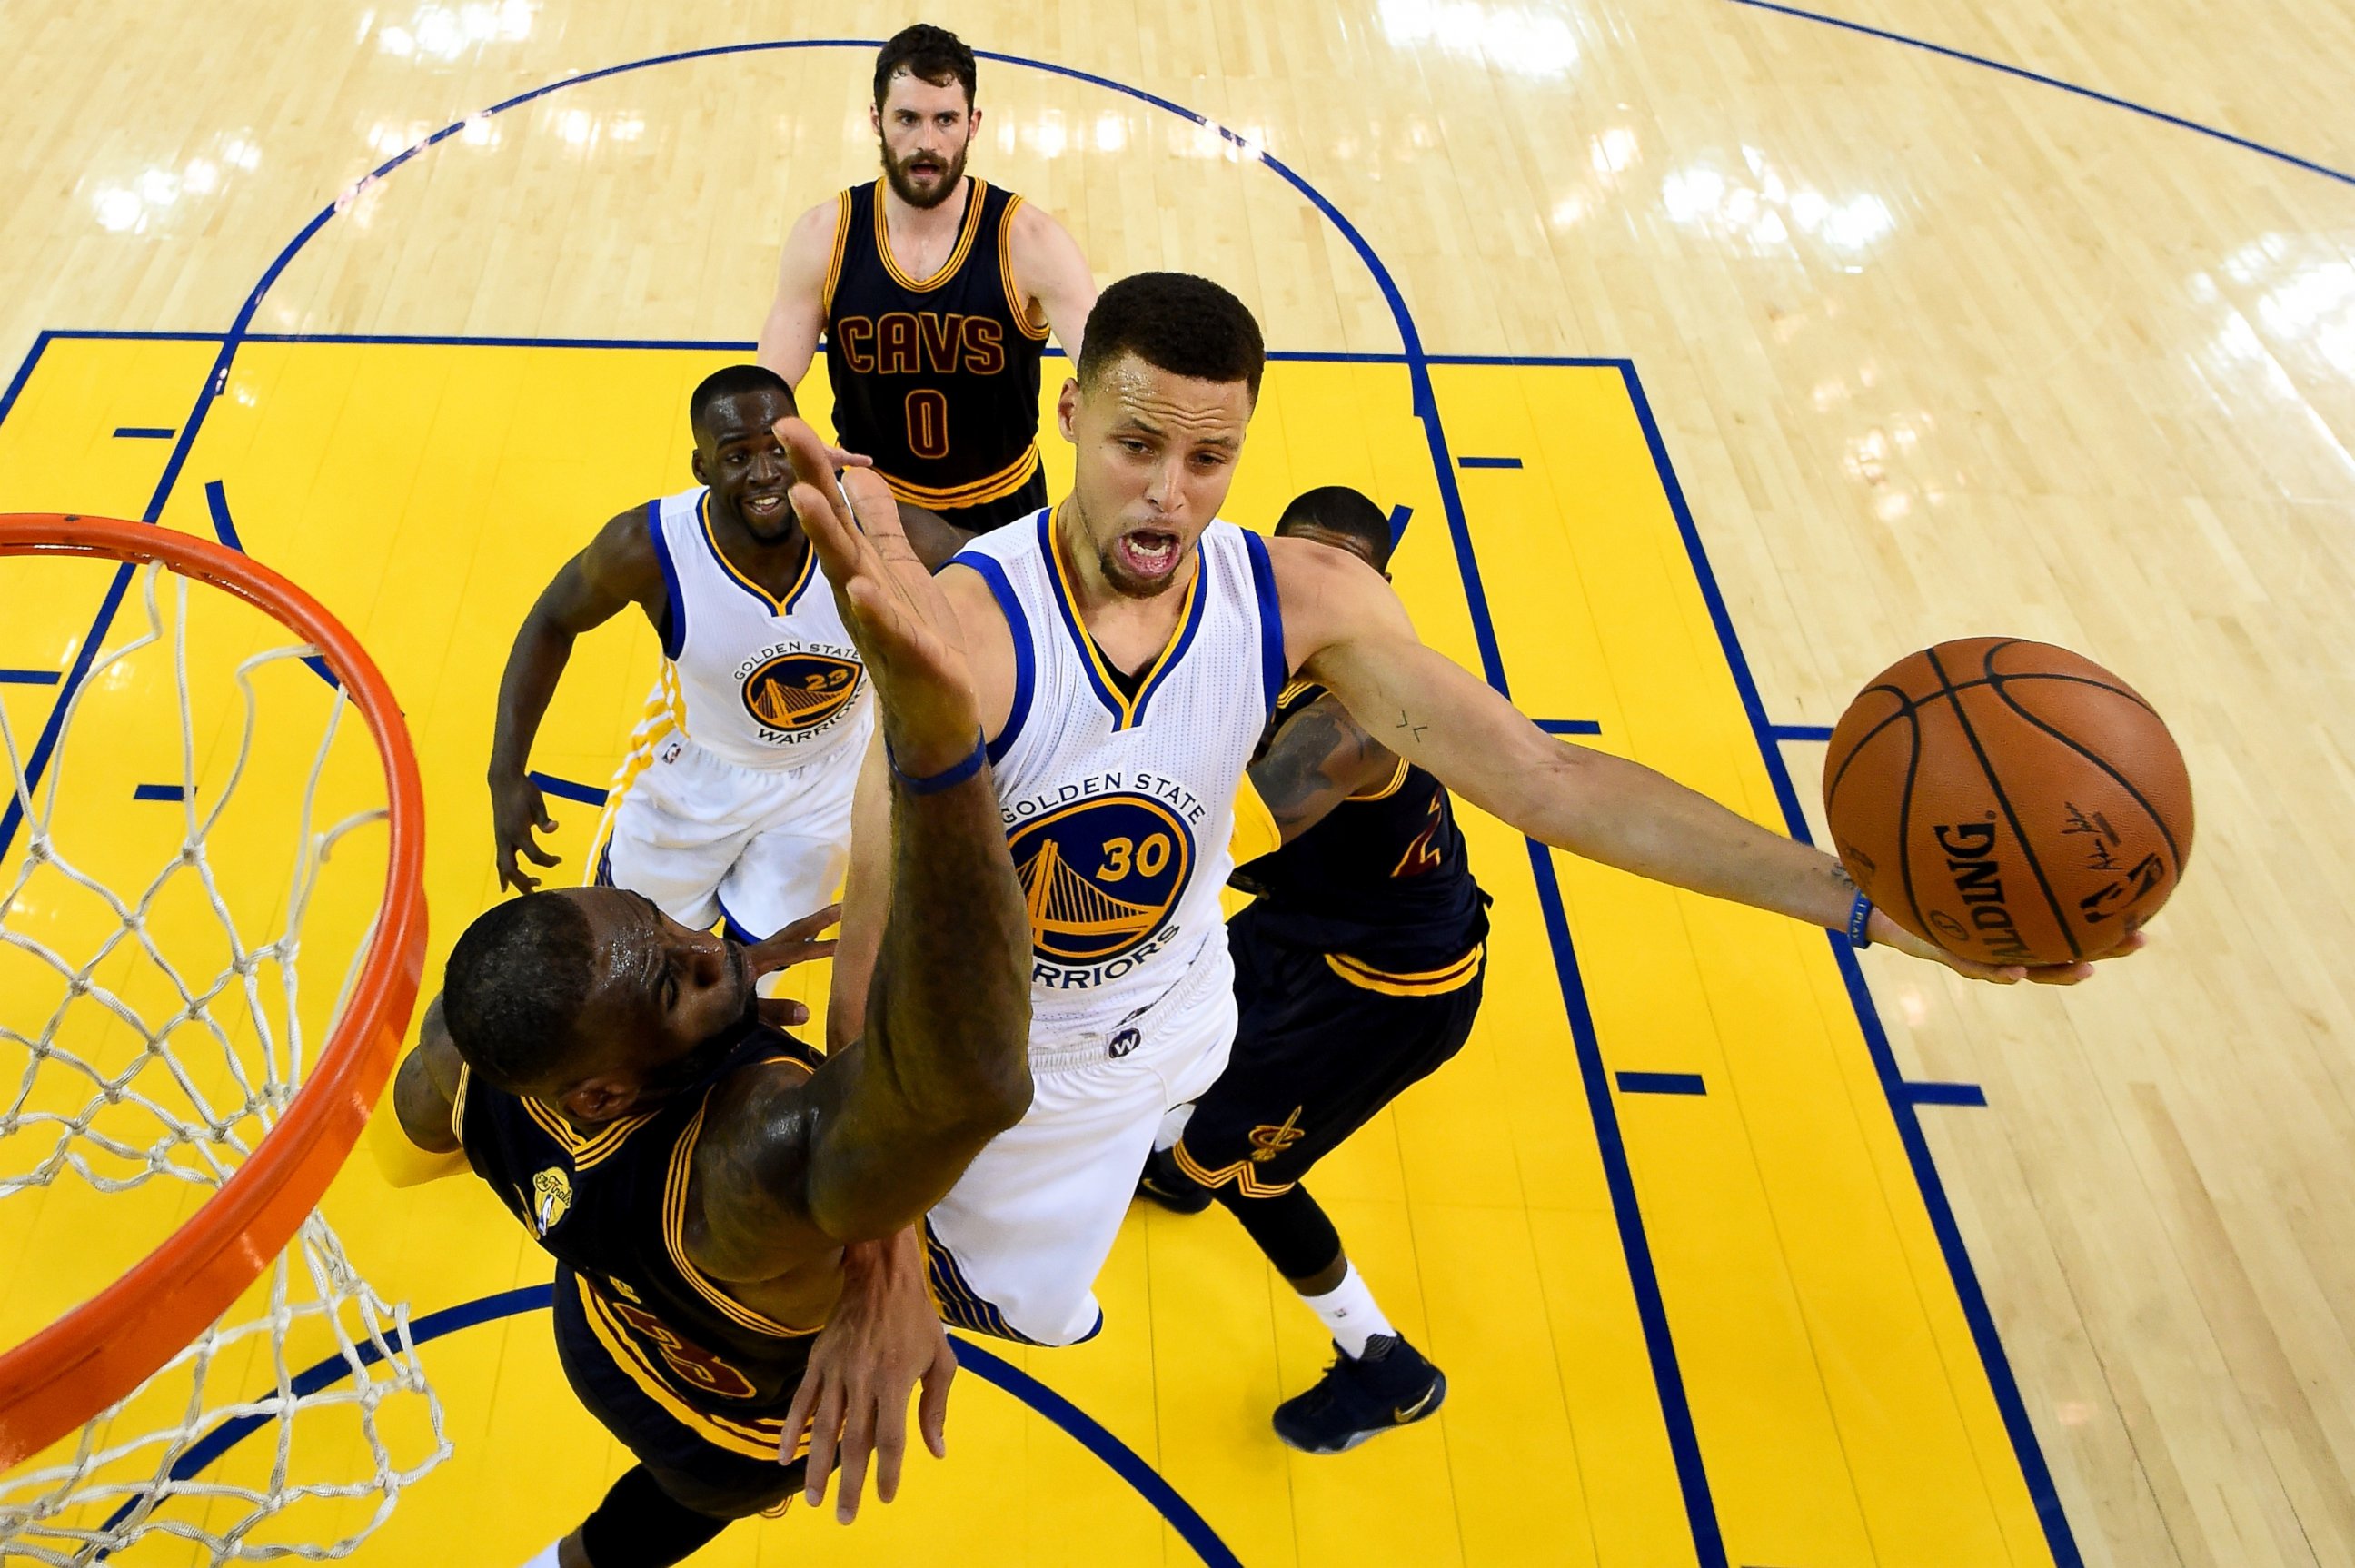 PHOTO: Stephen Curry of the Golden State Warriors goes up for a shot against LeBron James of the Cleveland Cavaliers in Game 2 of the 2016 NBA Finals, June 5, 2016, in Oakland, California.